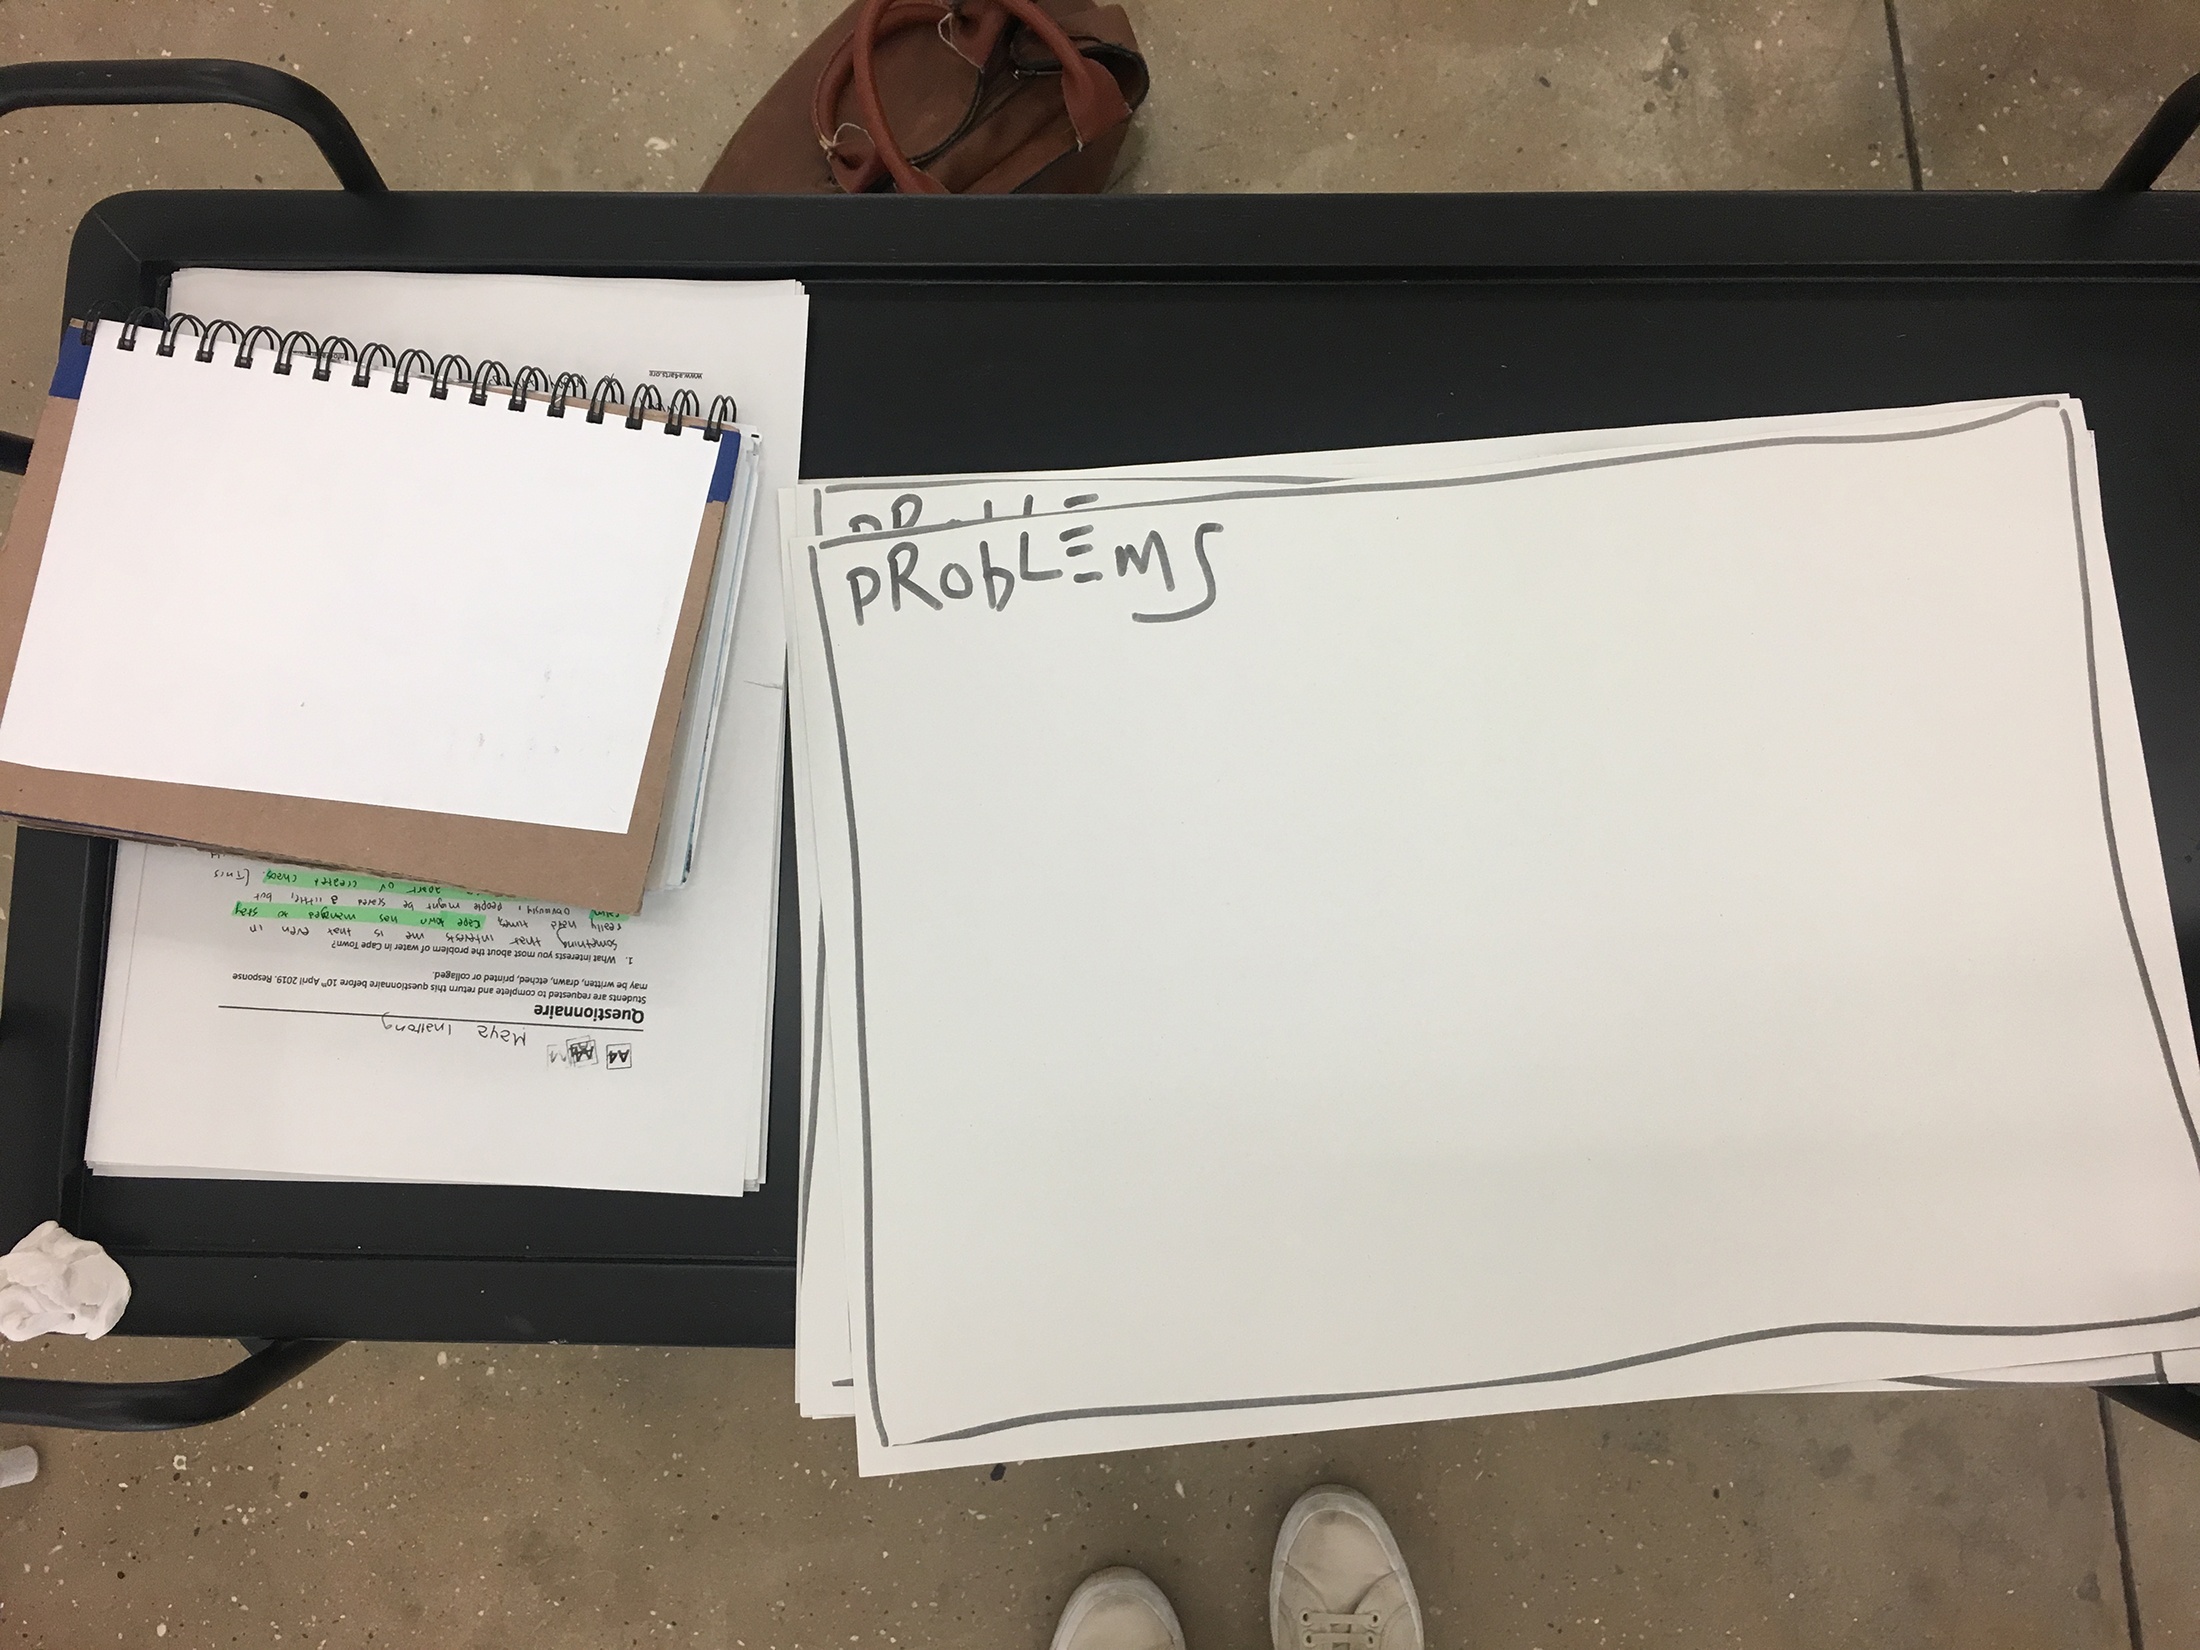 Photograph from the ‘Water Workshop with Edu Africa’ exchange in A4’s Gallery that depicts a black metal trolley. On the left, a stack of questionnaires and a paper notebook. On the right, a stack of papers with frames and the word ‘problems’ drawn in black felt marker.
